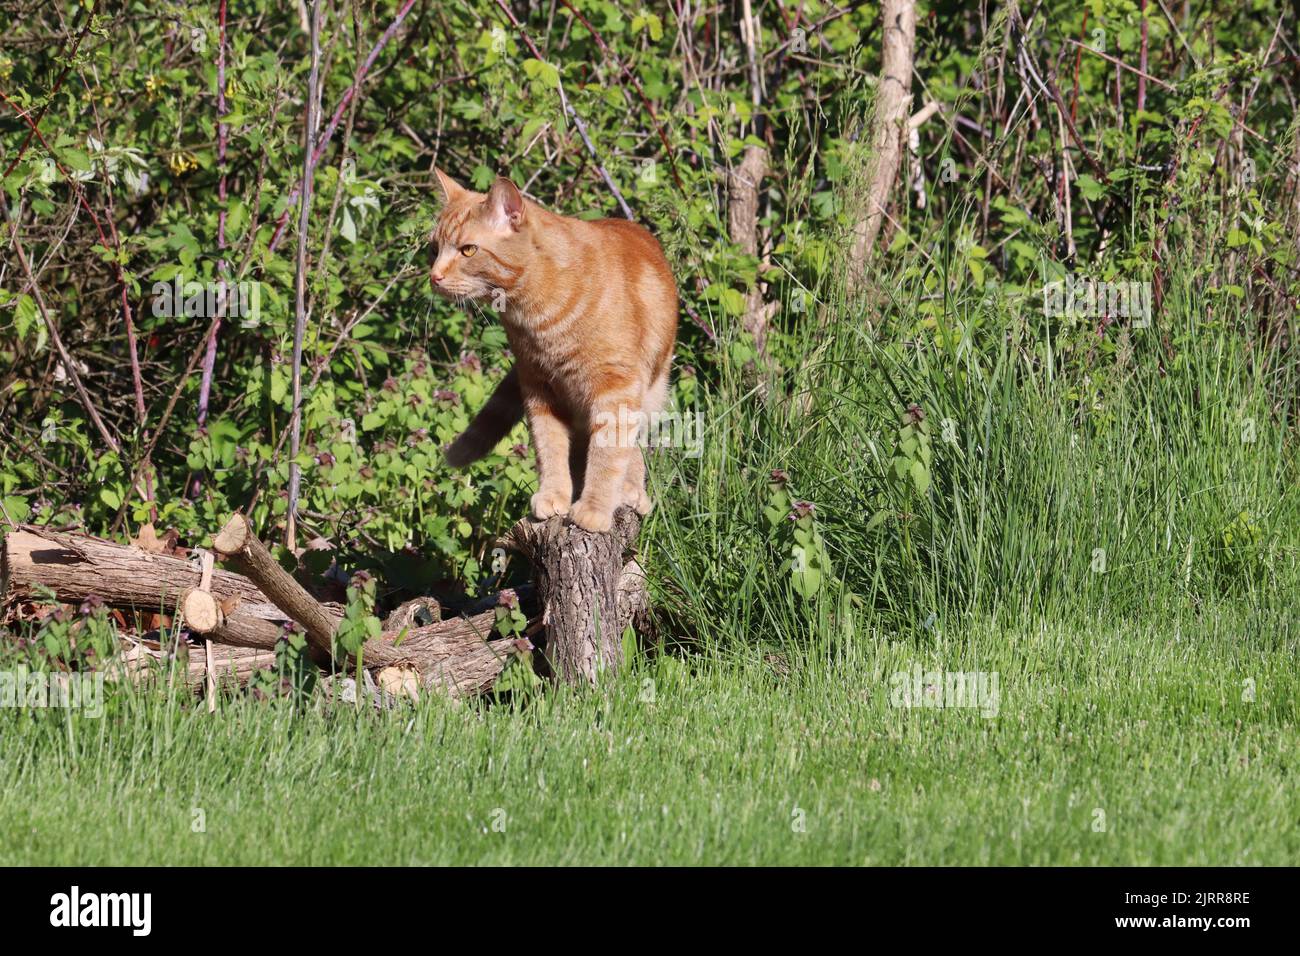 A copper-eyed, male orange domestic shorthair classic red tabby cat (Felis catus) outside standing on a wood pile and looking for prey Stock Photo